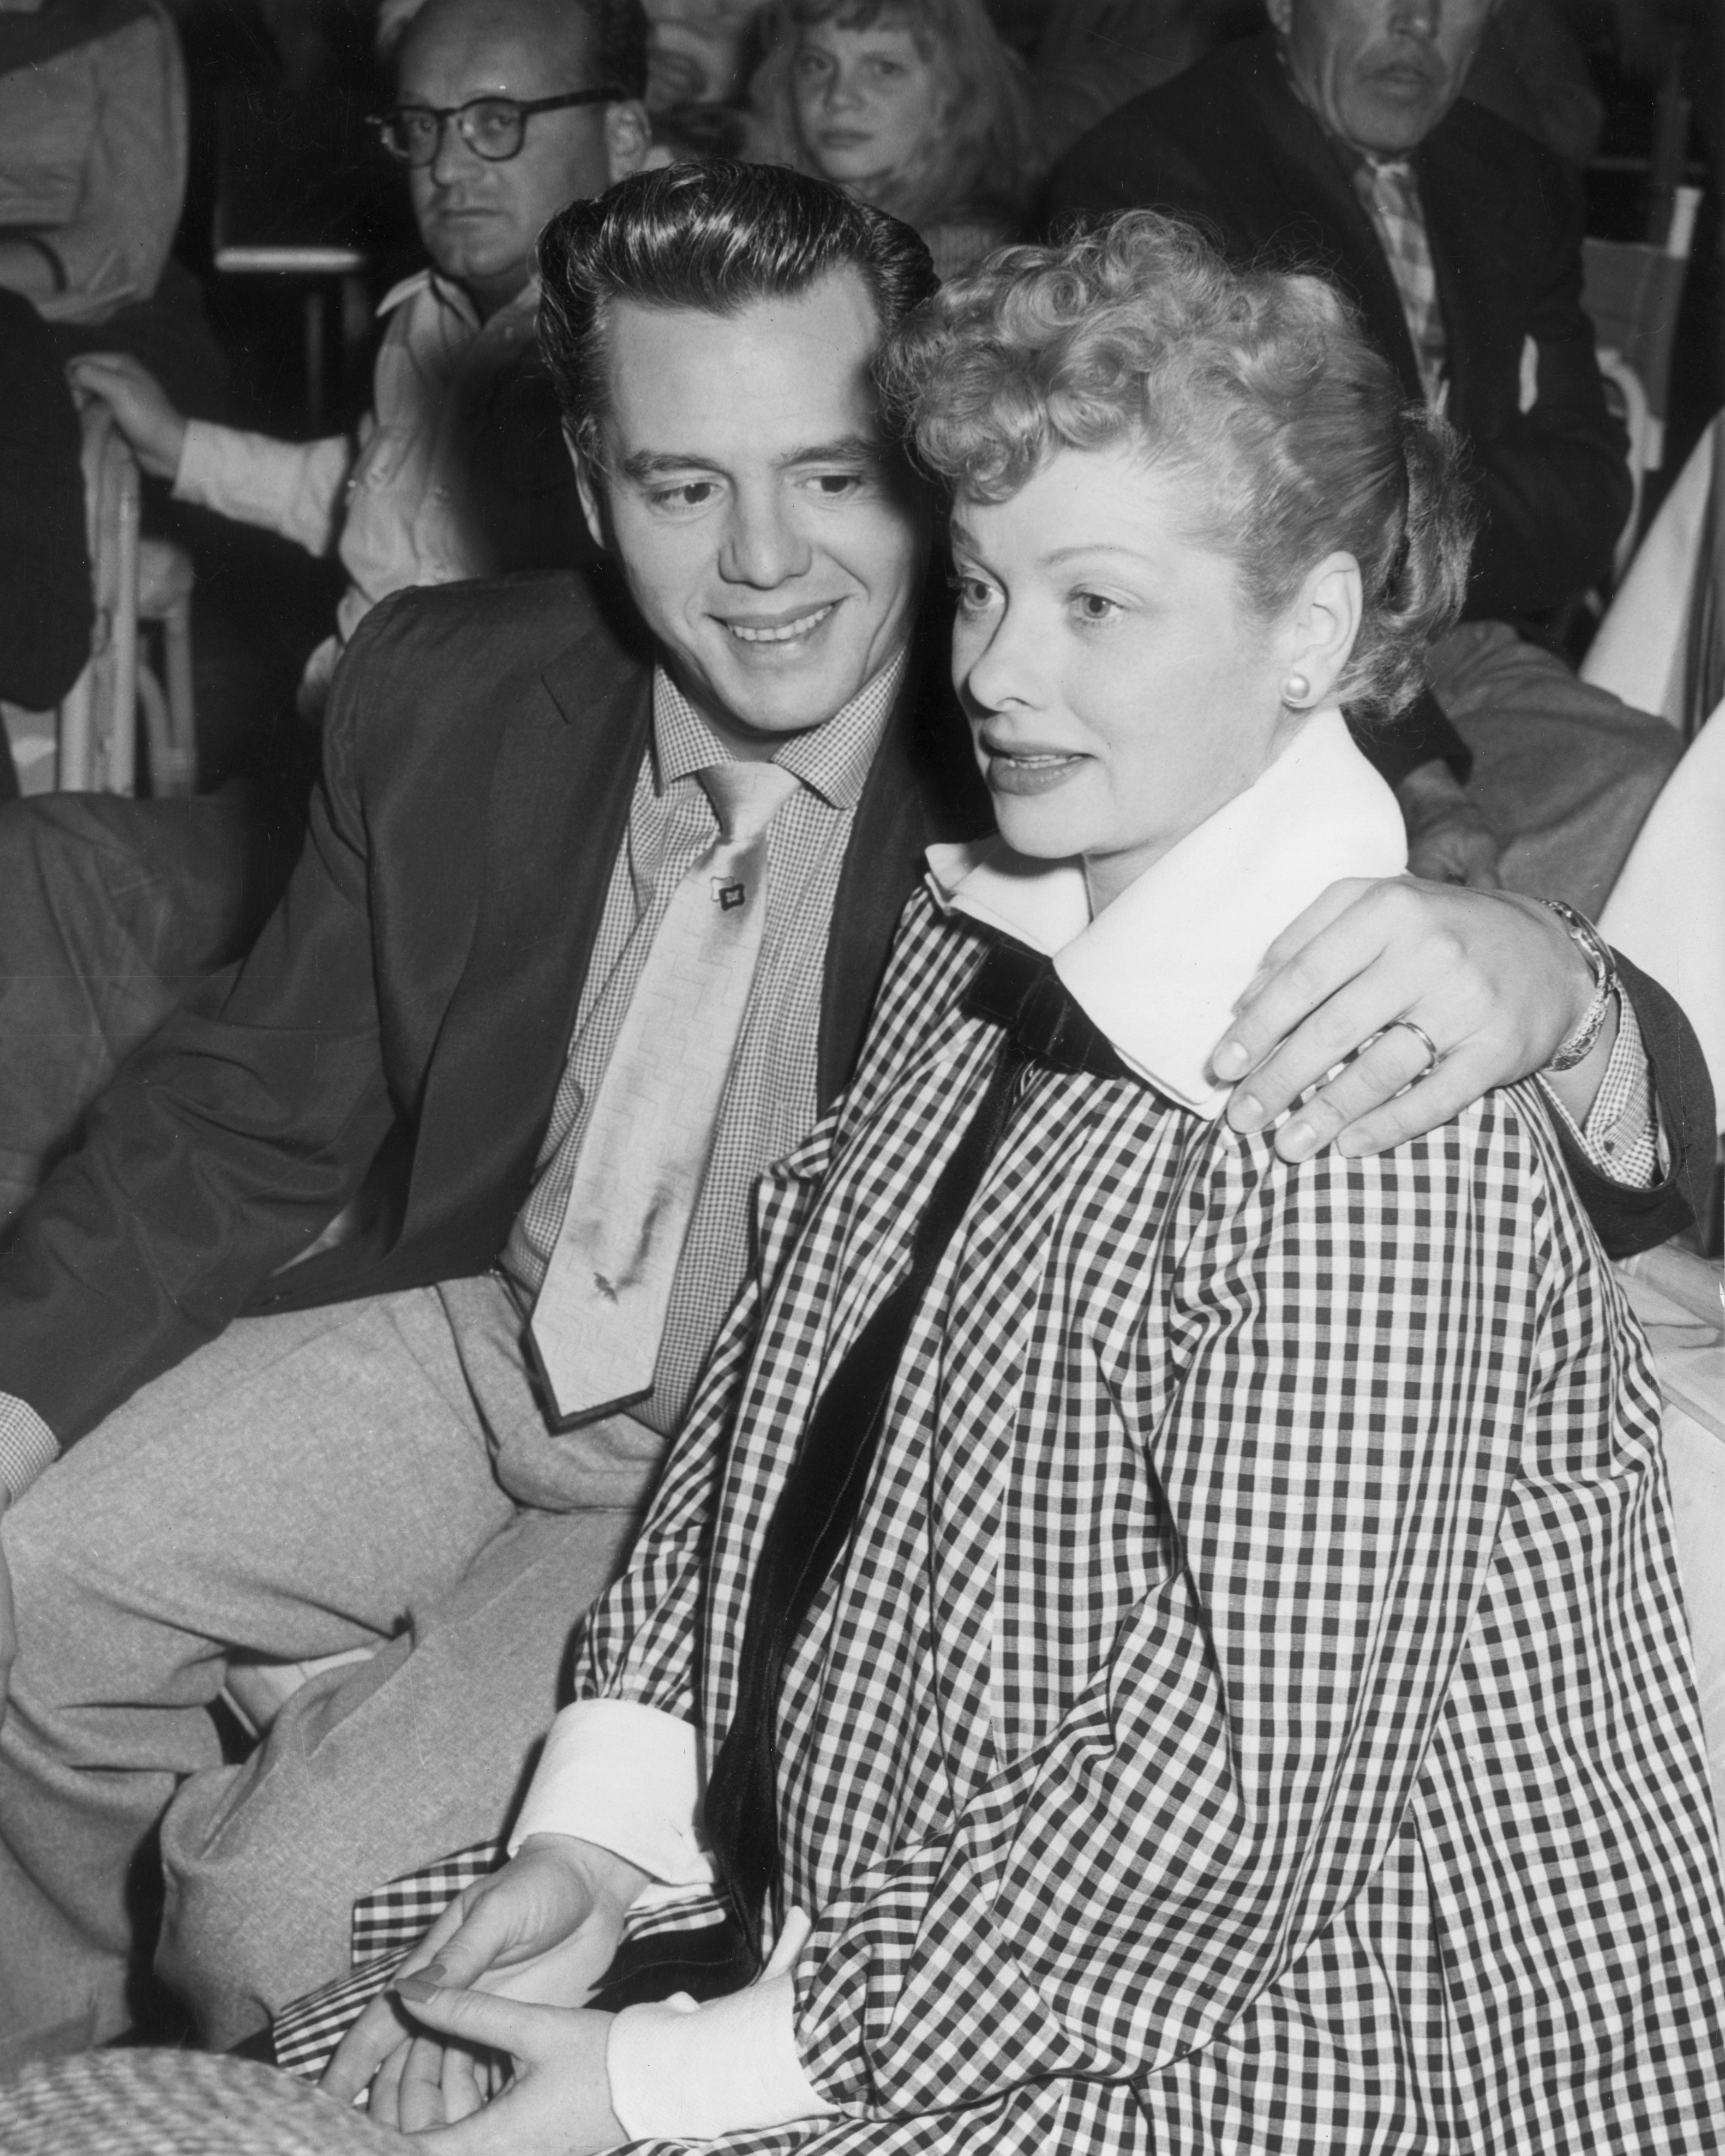 Desi Arnaz embraces his pregnant wife,Lucille Ball while watching a televised football game at the Racquet Club in Palm Springs, California in 1953. | Source: Getty Images